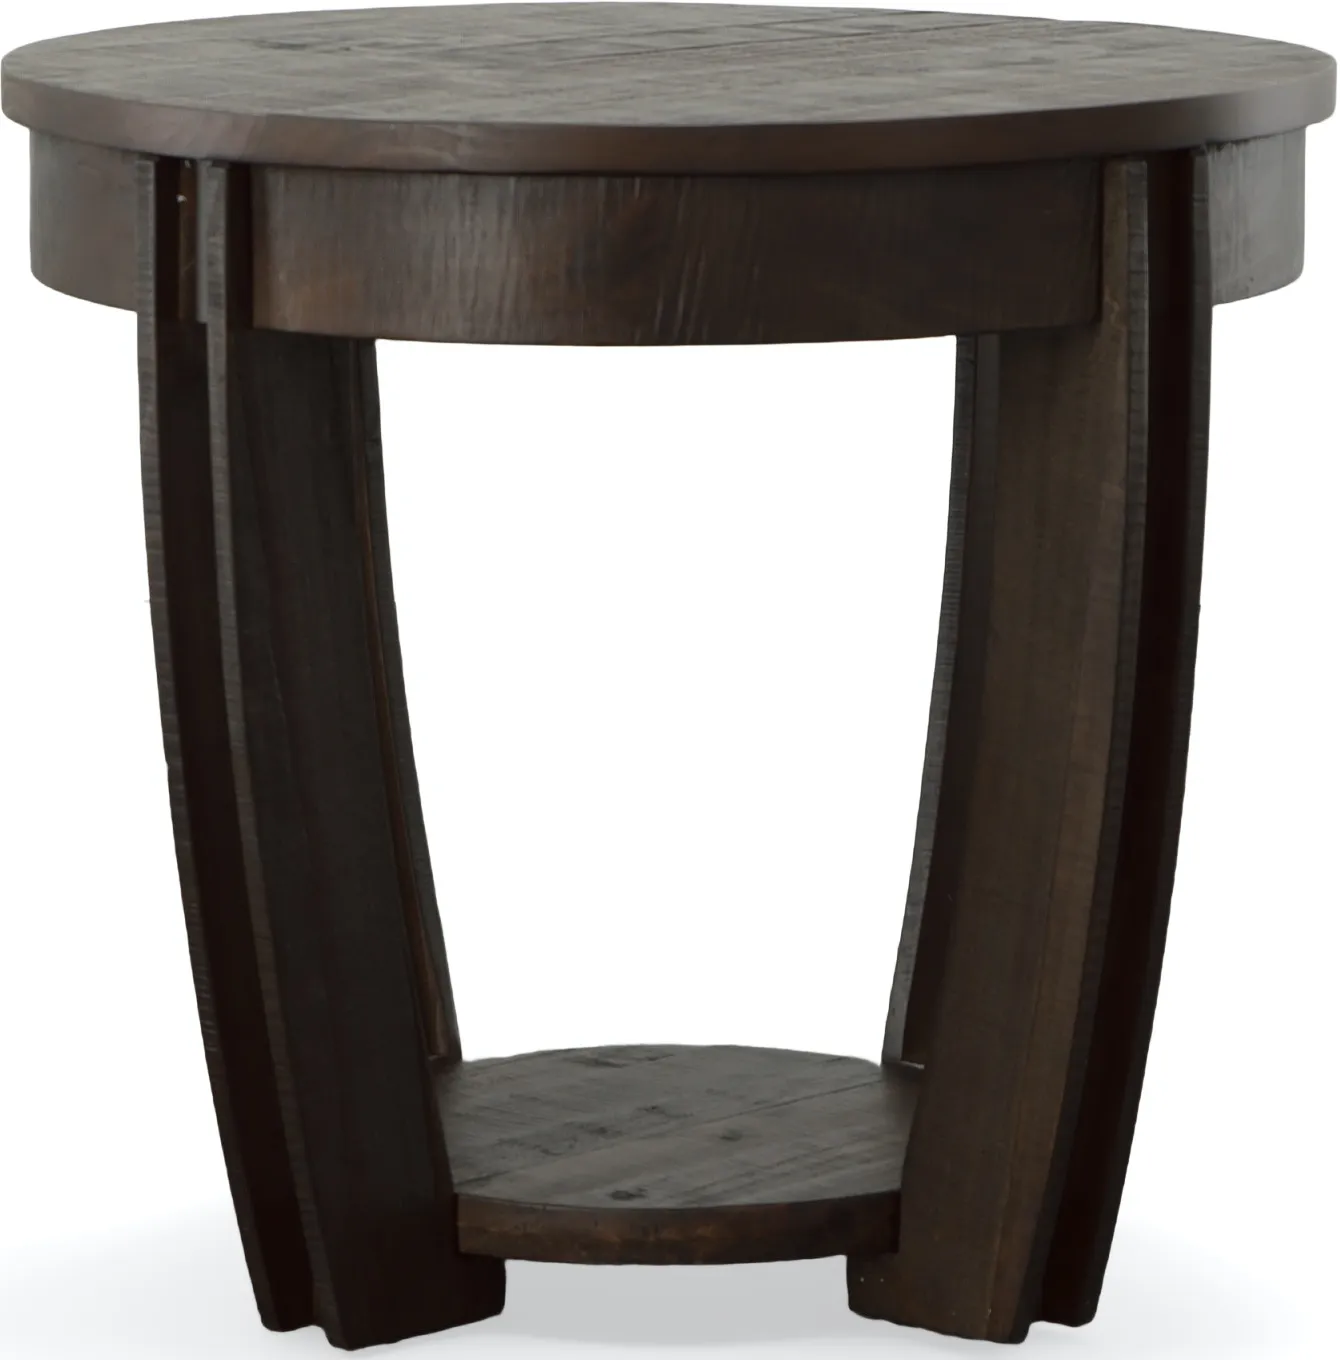 Magnussen Home LYNDALE ROUND END TABLE